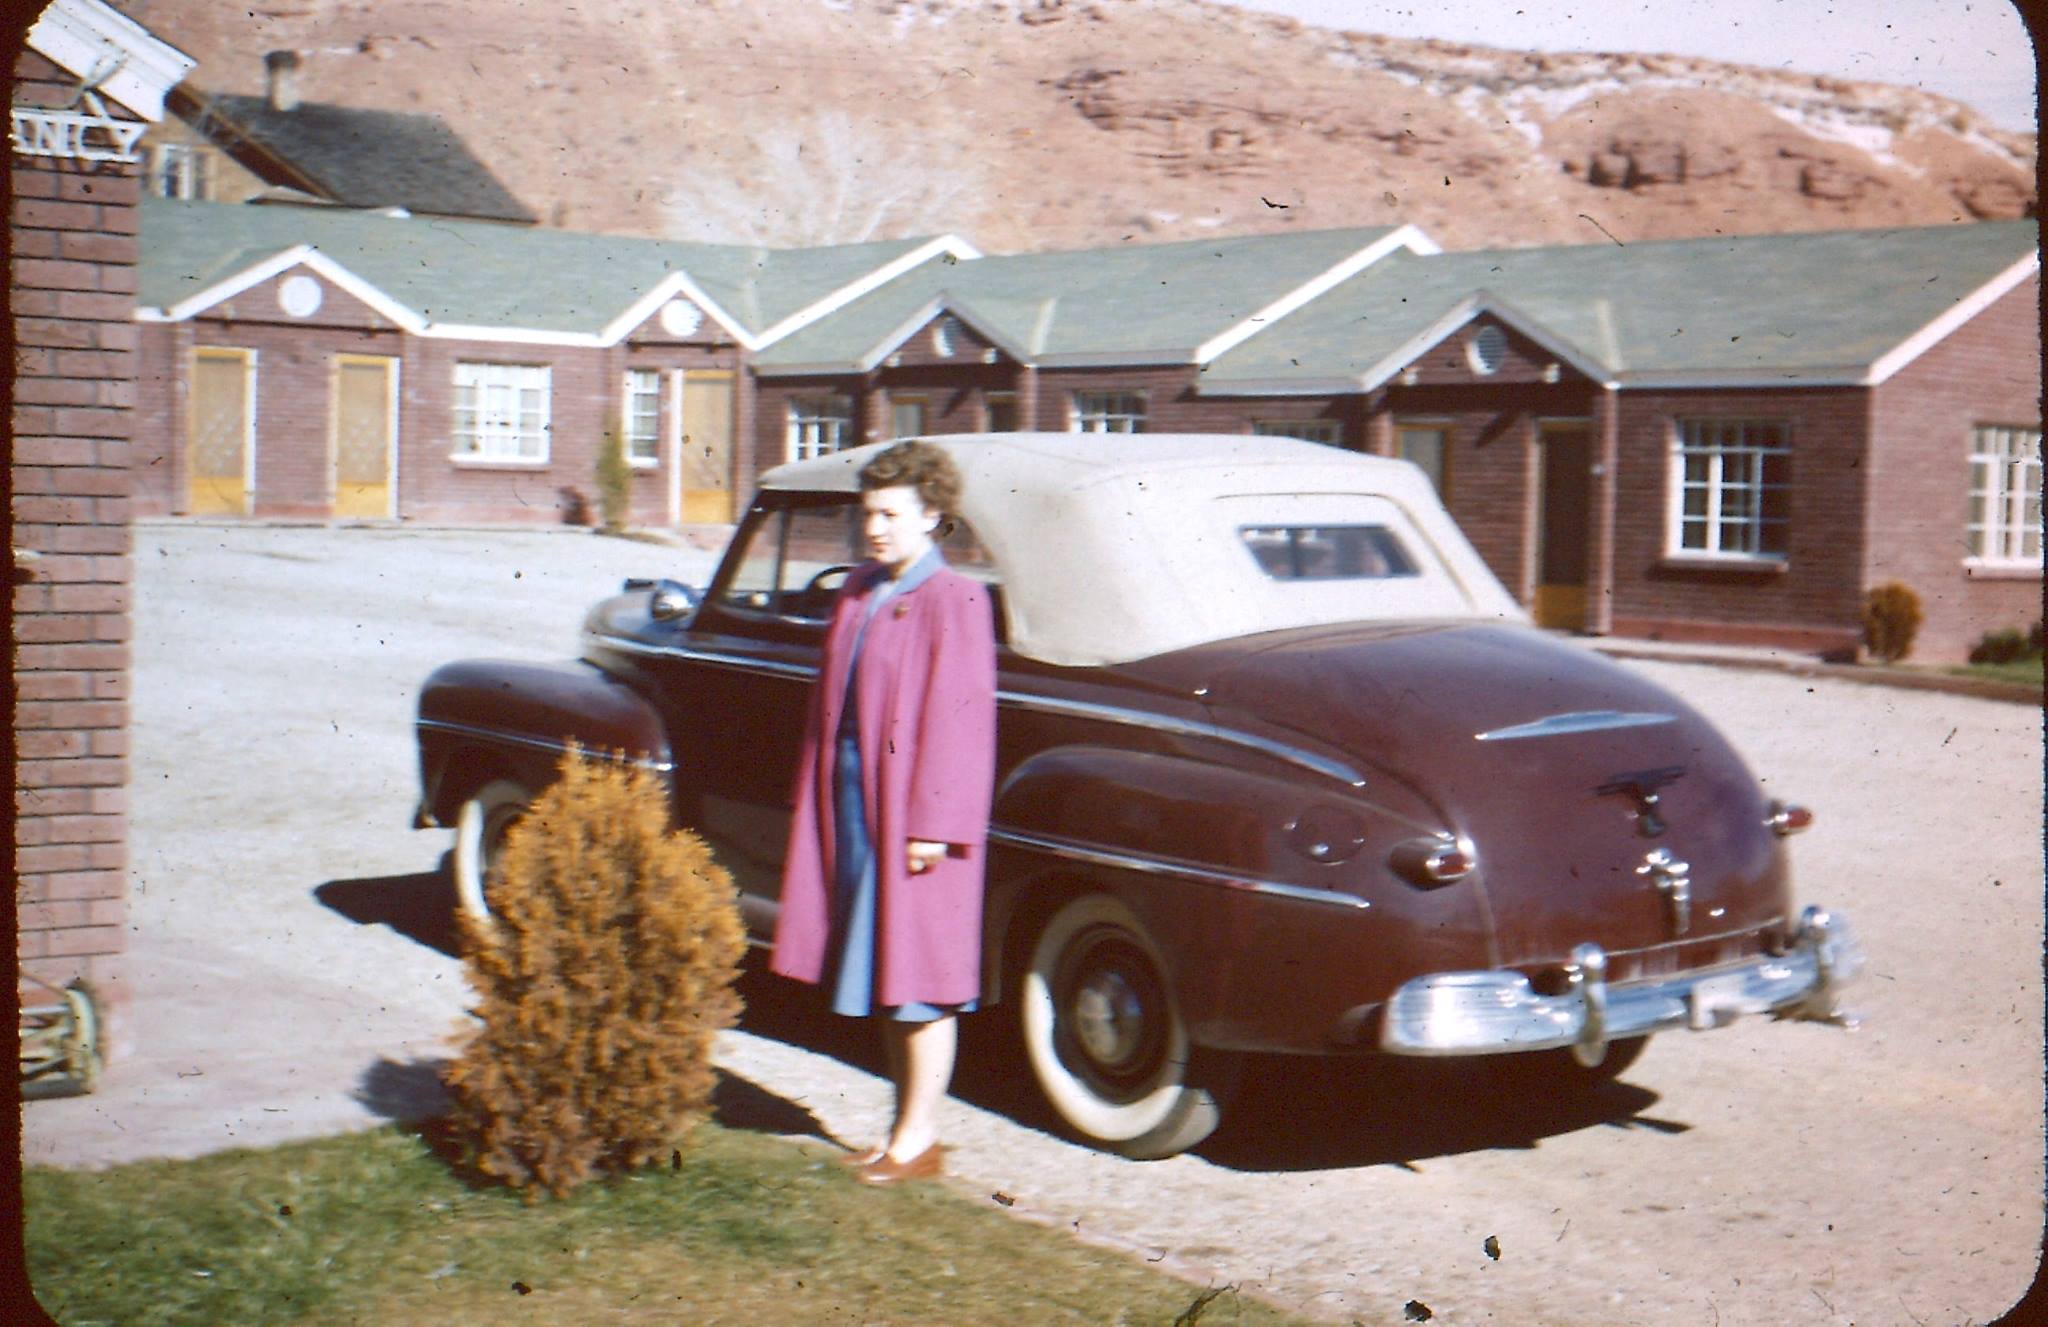 Shirley Hail at the Hail's Motel in St. George